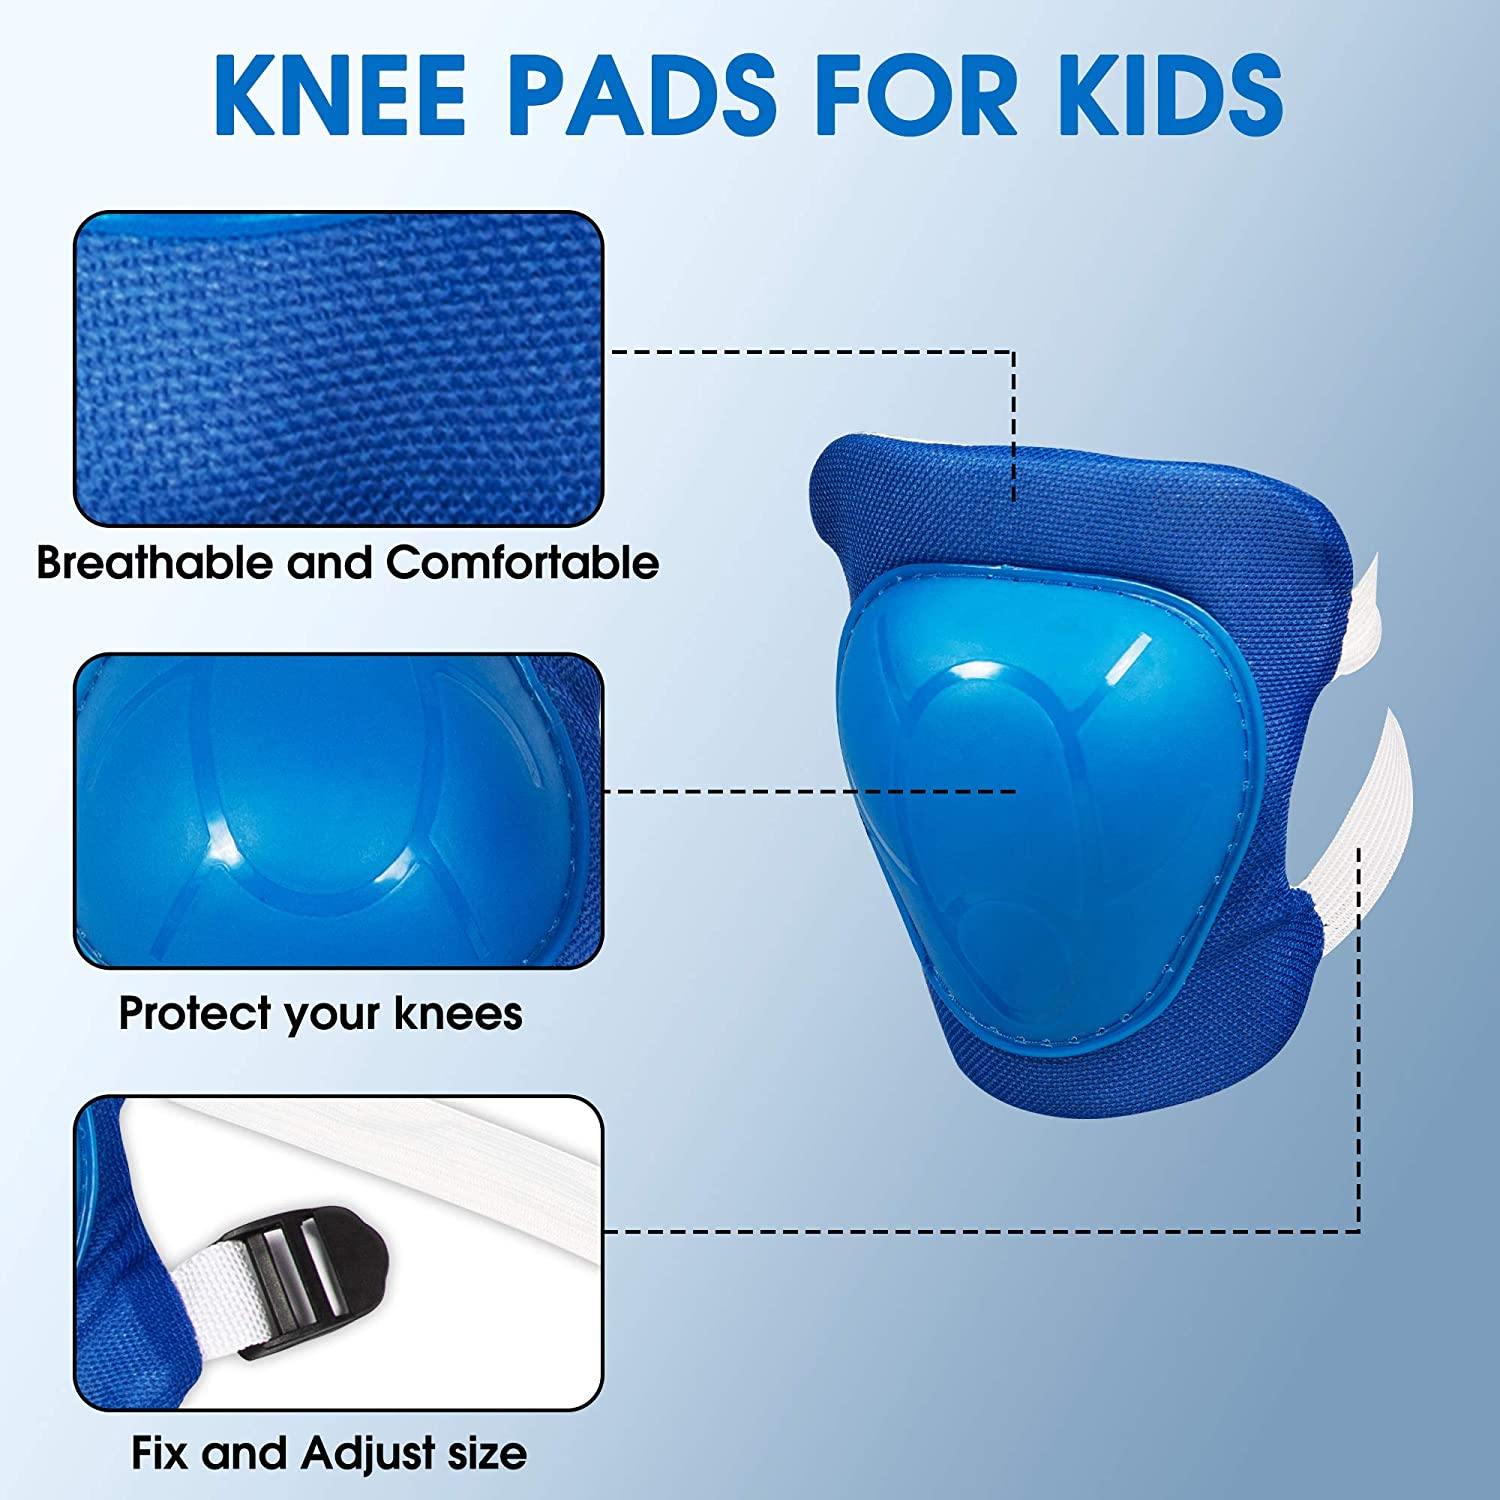 Kids Helmet with Knee Elbow Wrist Pads - Adjustable Ultralight Toddlers Toys Protective Gear Set for Skating Walking Cycling, Age 1-6 - Bosonshop